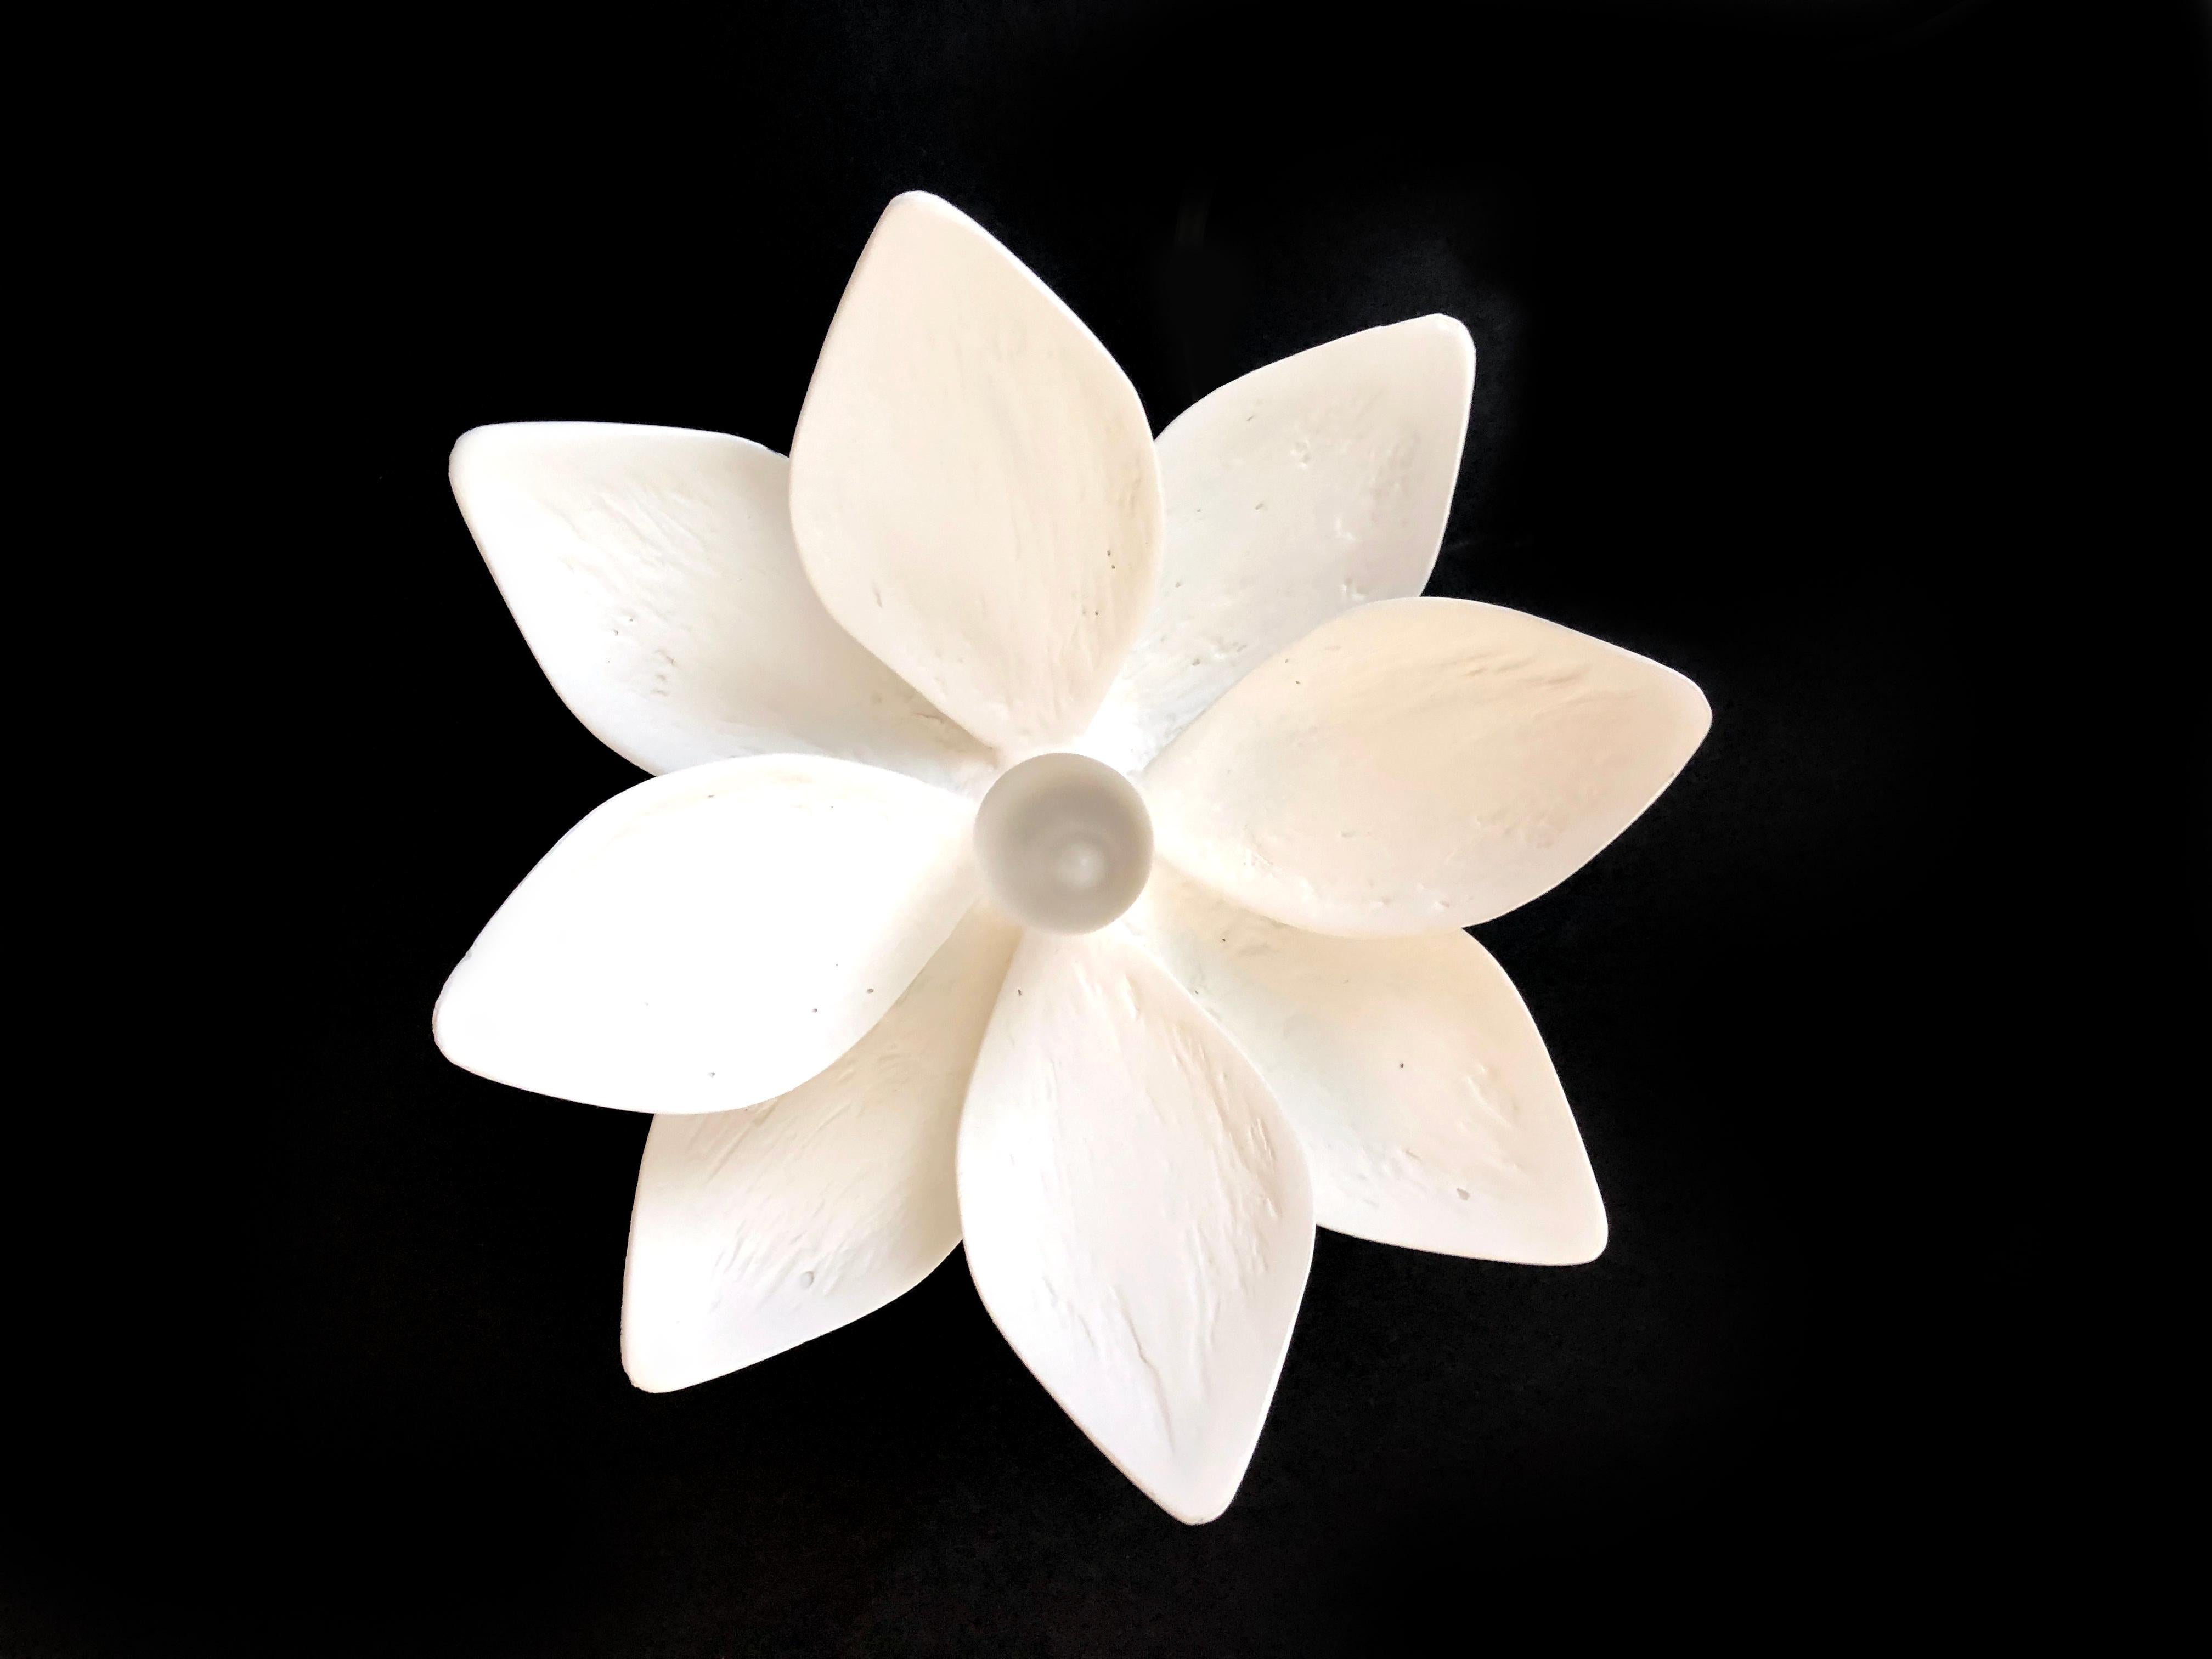 This simple, yet ornate sconce has our signature plaster of Paris finish. Its magnolia blossom will bring nature inside and was designed to complement our Vosges Chandelier. The versatile sconce will accentuate the beauty of your home with the